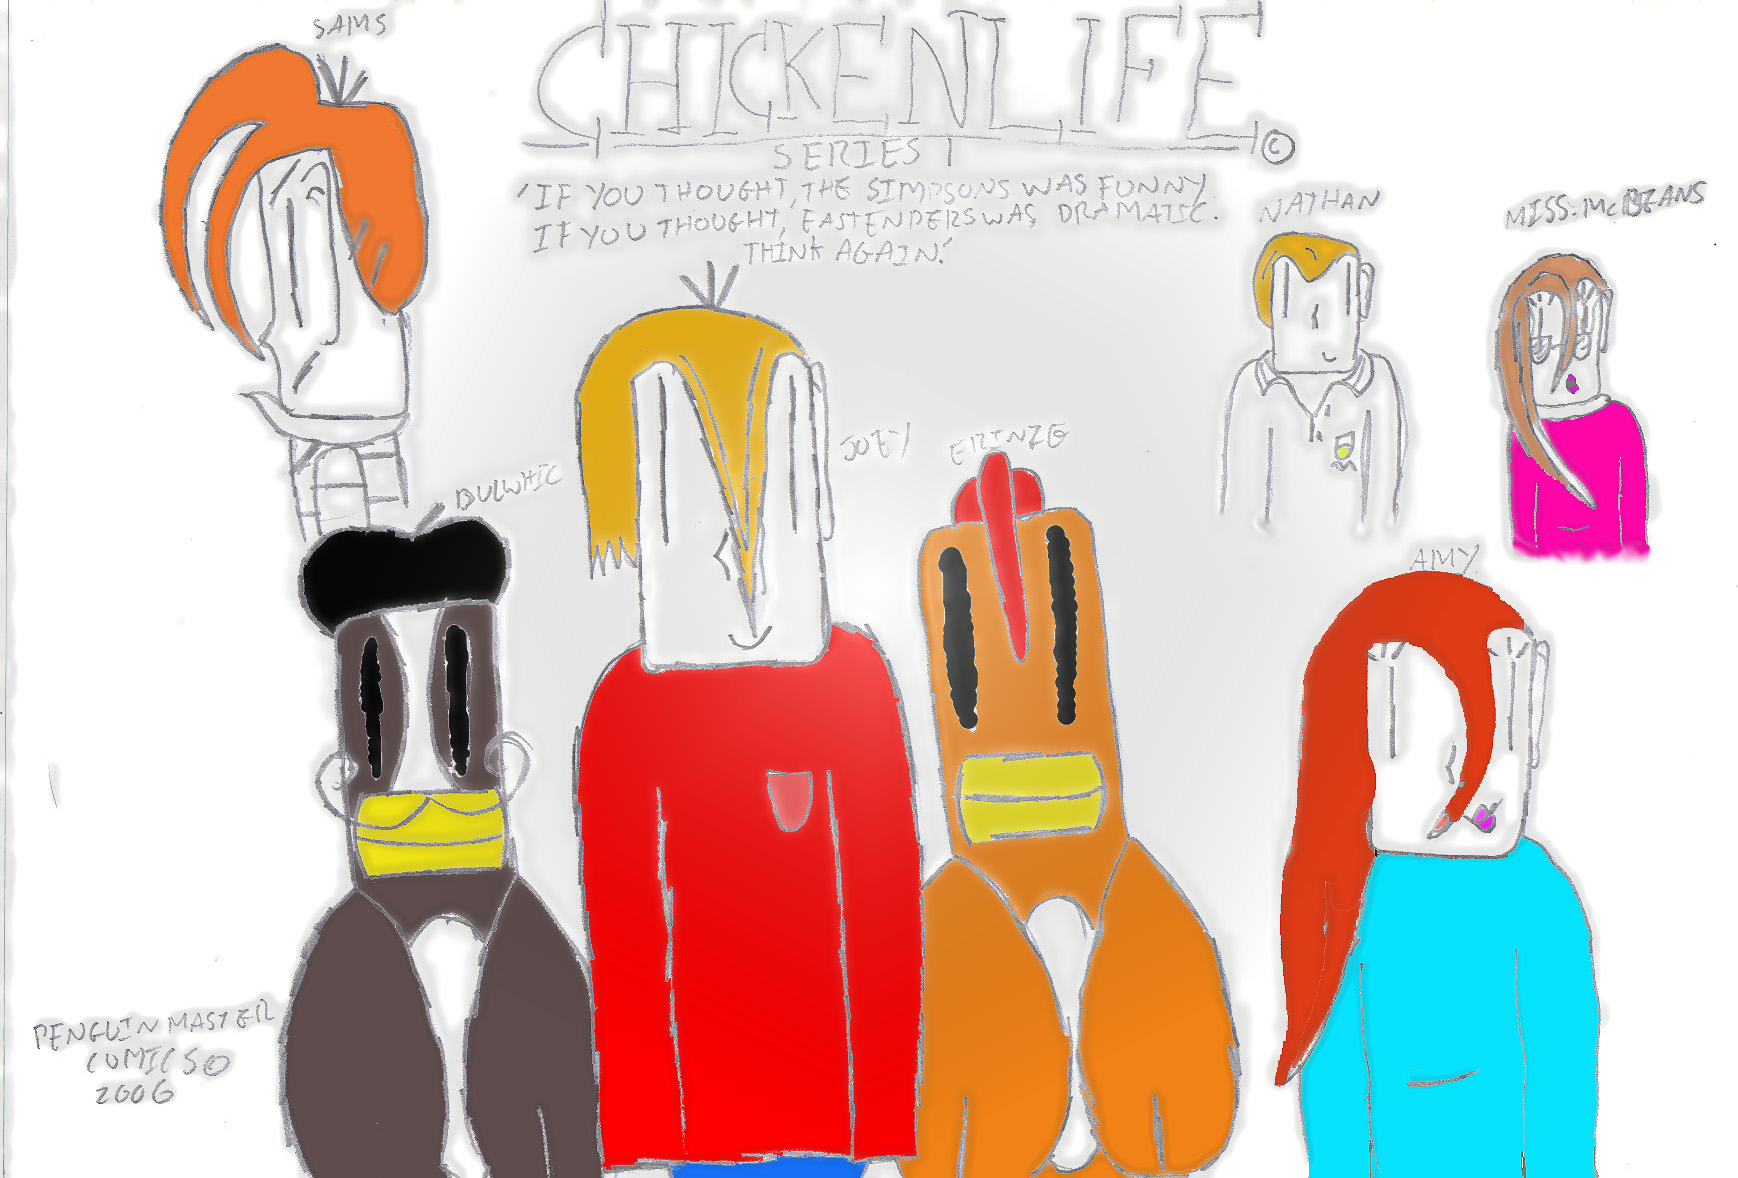 Chickenlife Series 1 by penguinmaster